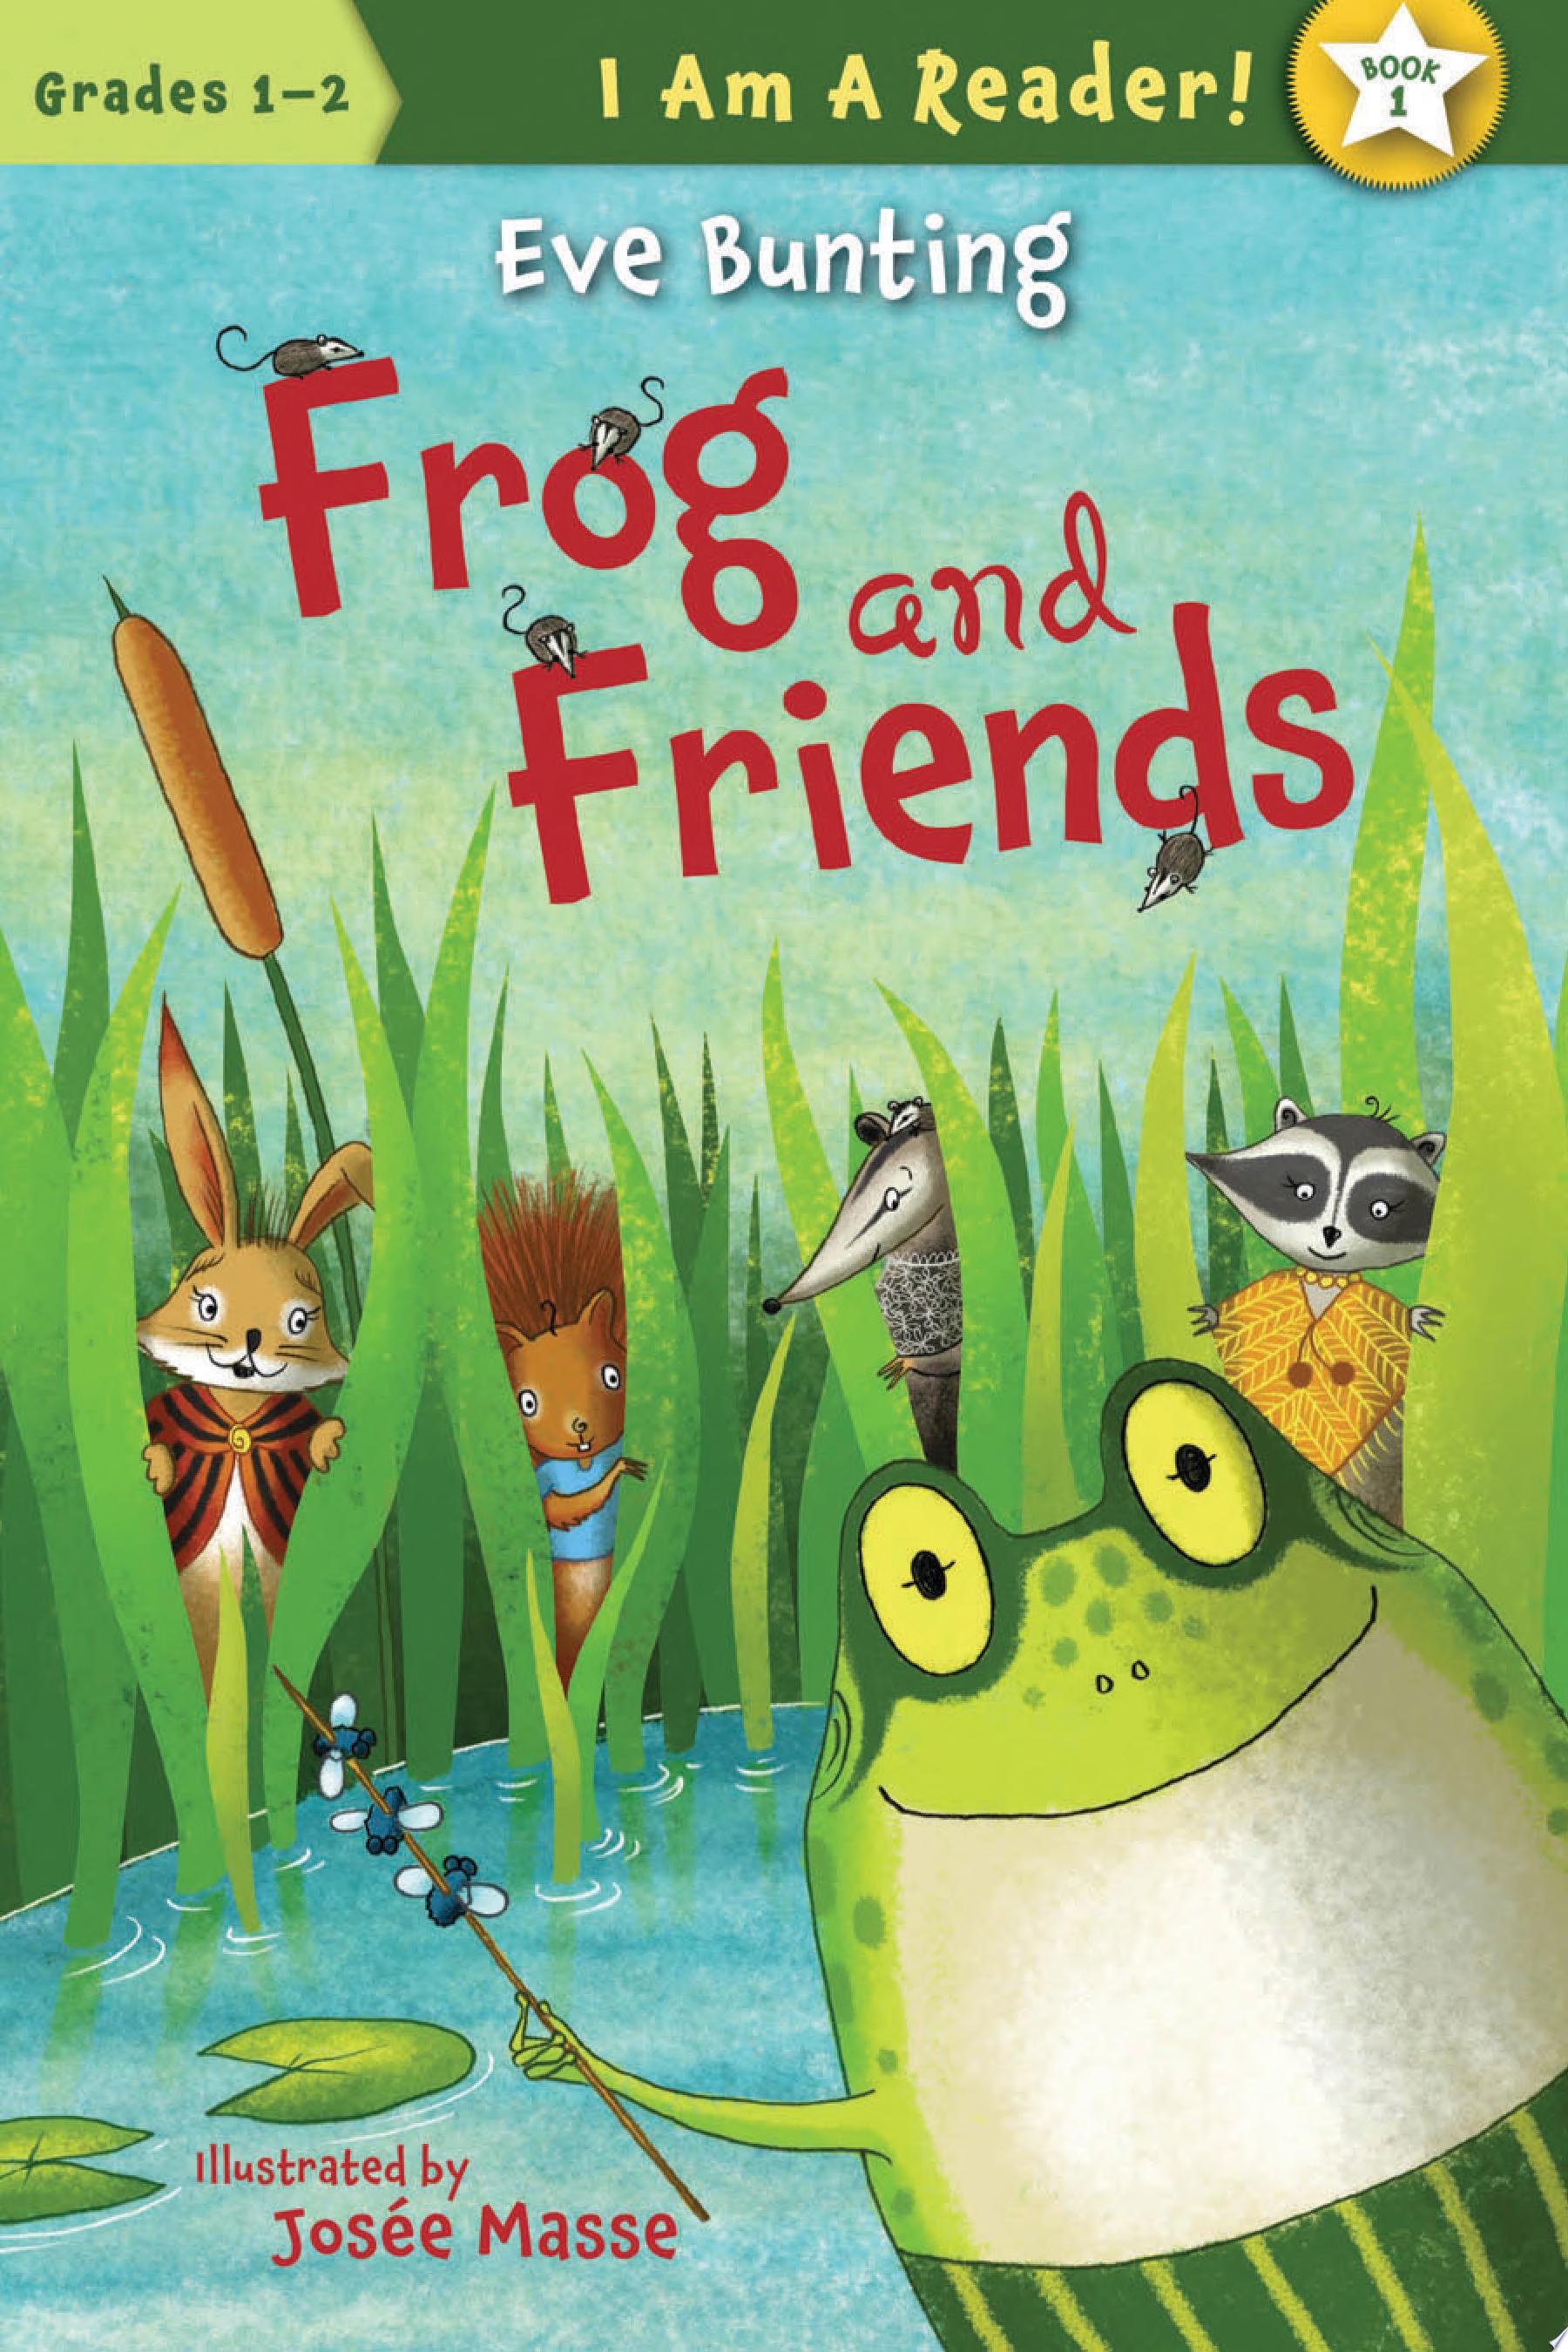 Image for "Frog and Friends"